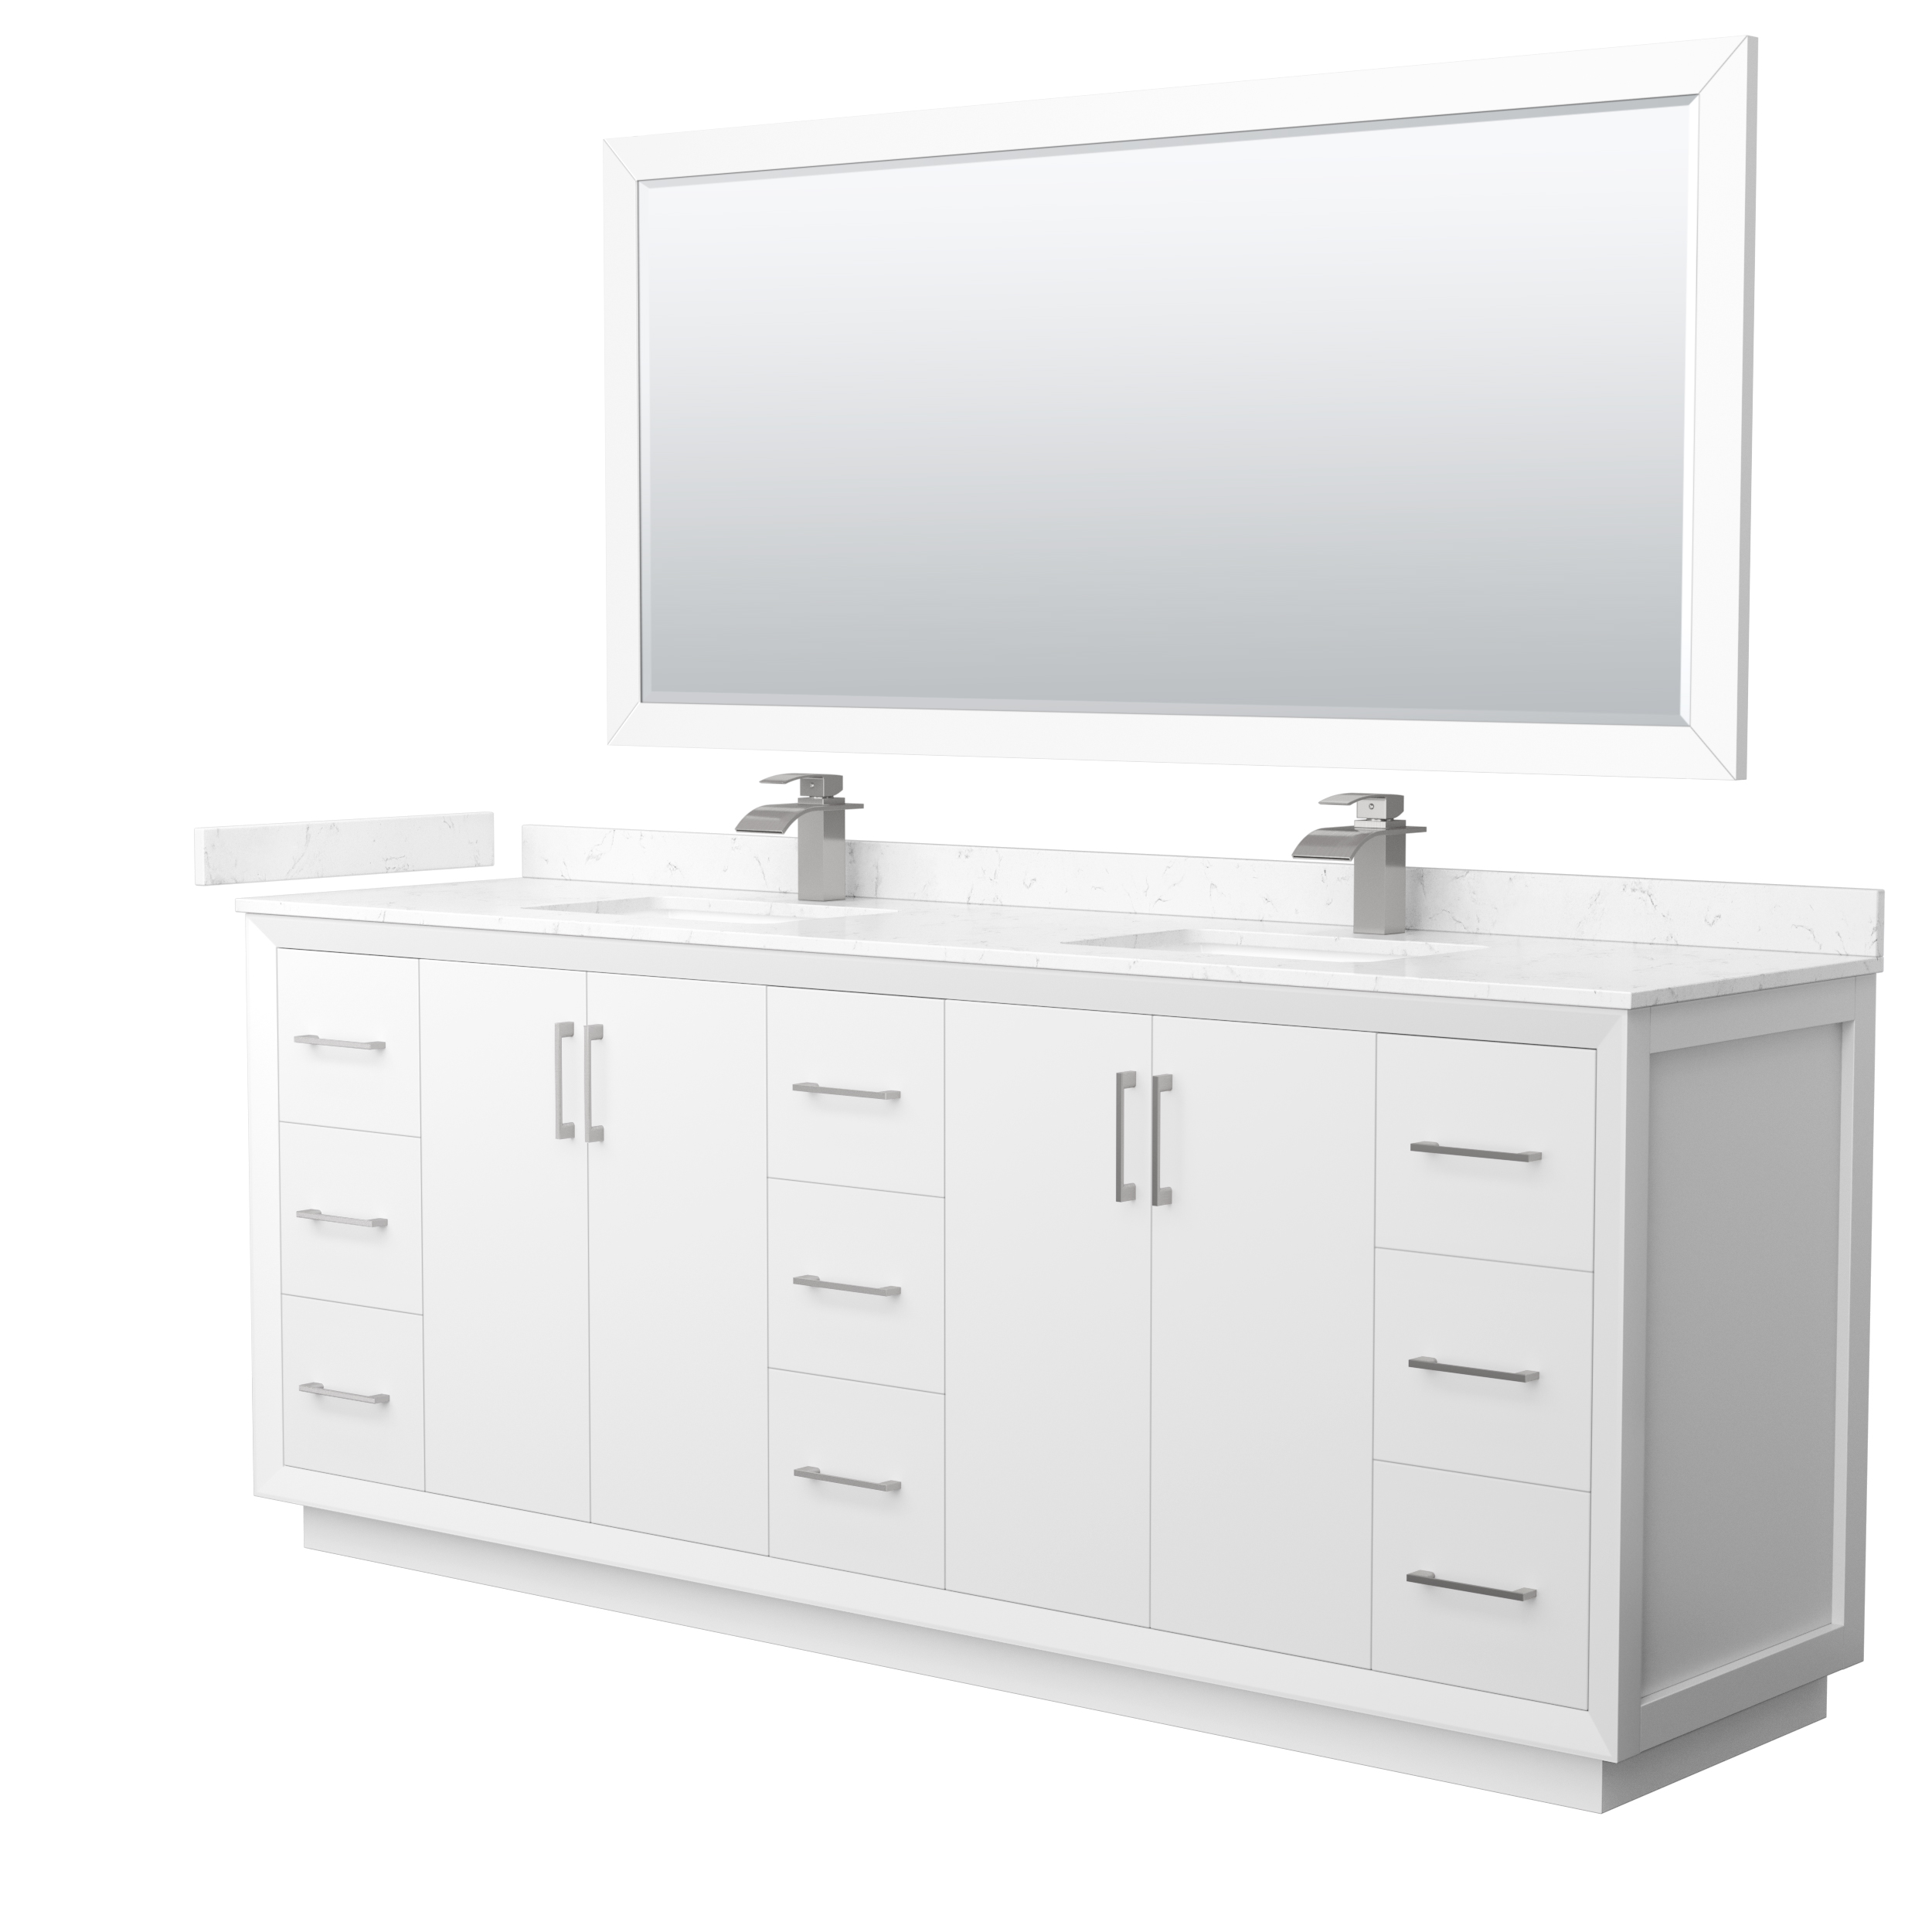 Strada 84" Double Vanity with optional Cultured Marble Counter - Dark Gray WC-4141-84-DBL-VAN-DKG-